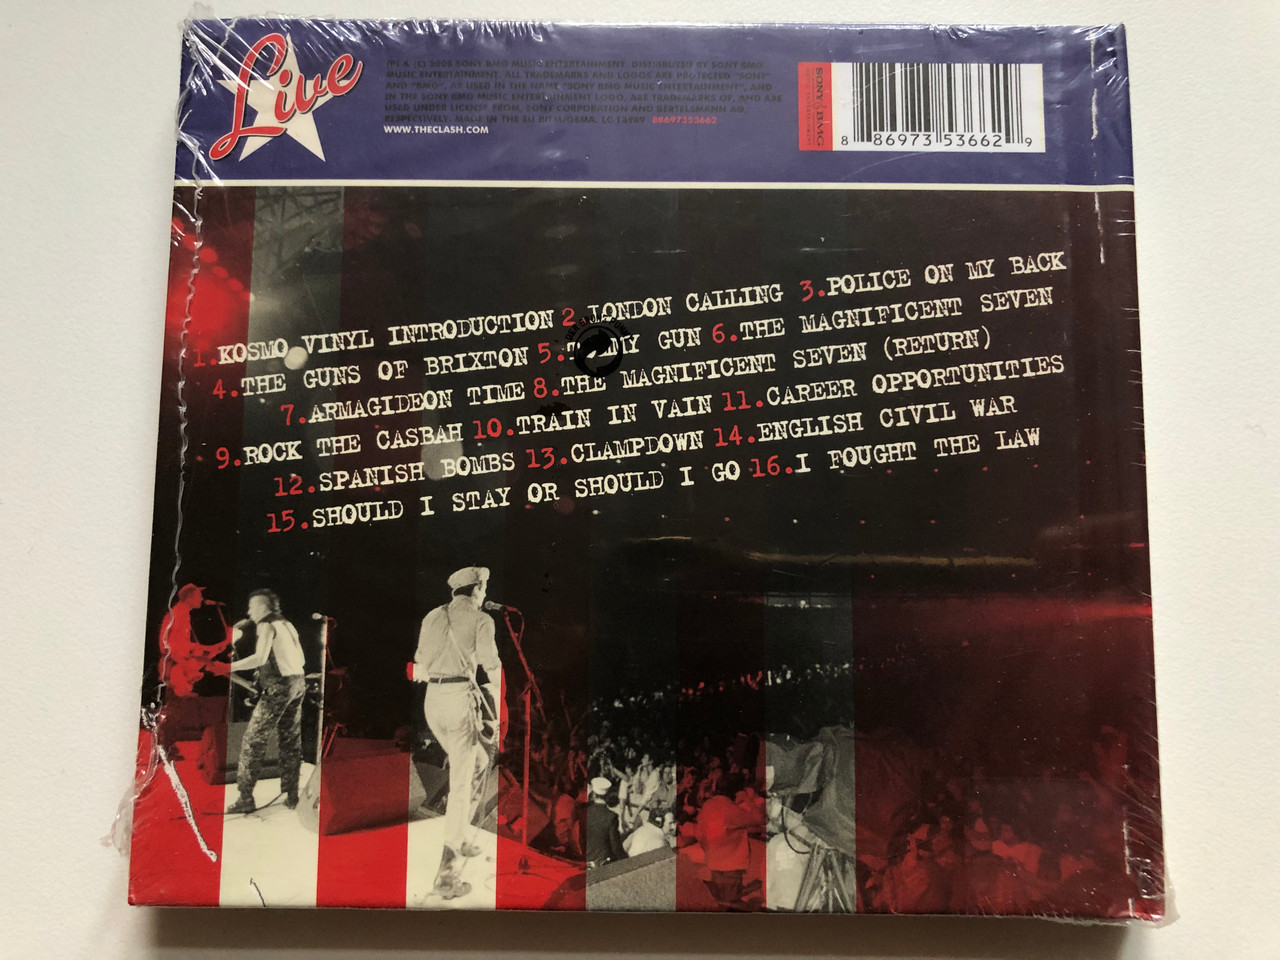 https://cdn10.bigcommerce.com/s-62bdpkt7pb/products/0/images/249238/The_Clash_Live_At_Shea_Stadium_Limited_Deluxe_Edition_With_24_Page_Booklet_October_13th_1982_Shea_Stadion_New_York_Experience_The_Intensity_Of_The_Clash_Live_Sony_BMG_Music_Enterta__23435.1660840836.1280.1280.JPG?c=2&_gl=1*1cxifqd*_ga*MjA2NTIxMjE2MC4xNTkwNTEyNTMy*_ga_WS2VZYPC6G*MTY2MDgyNjg1NS41MzEuMS4xNjYwODQwODA2LjYwLjAuMA..